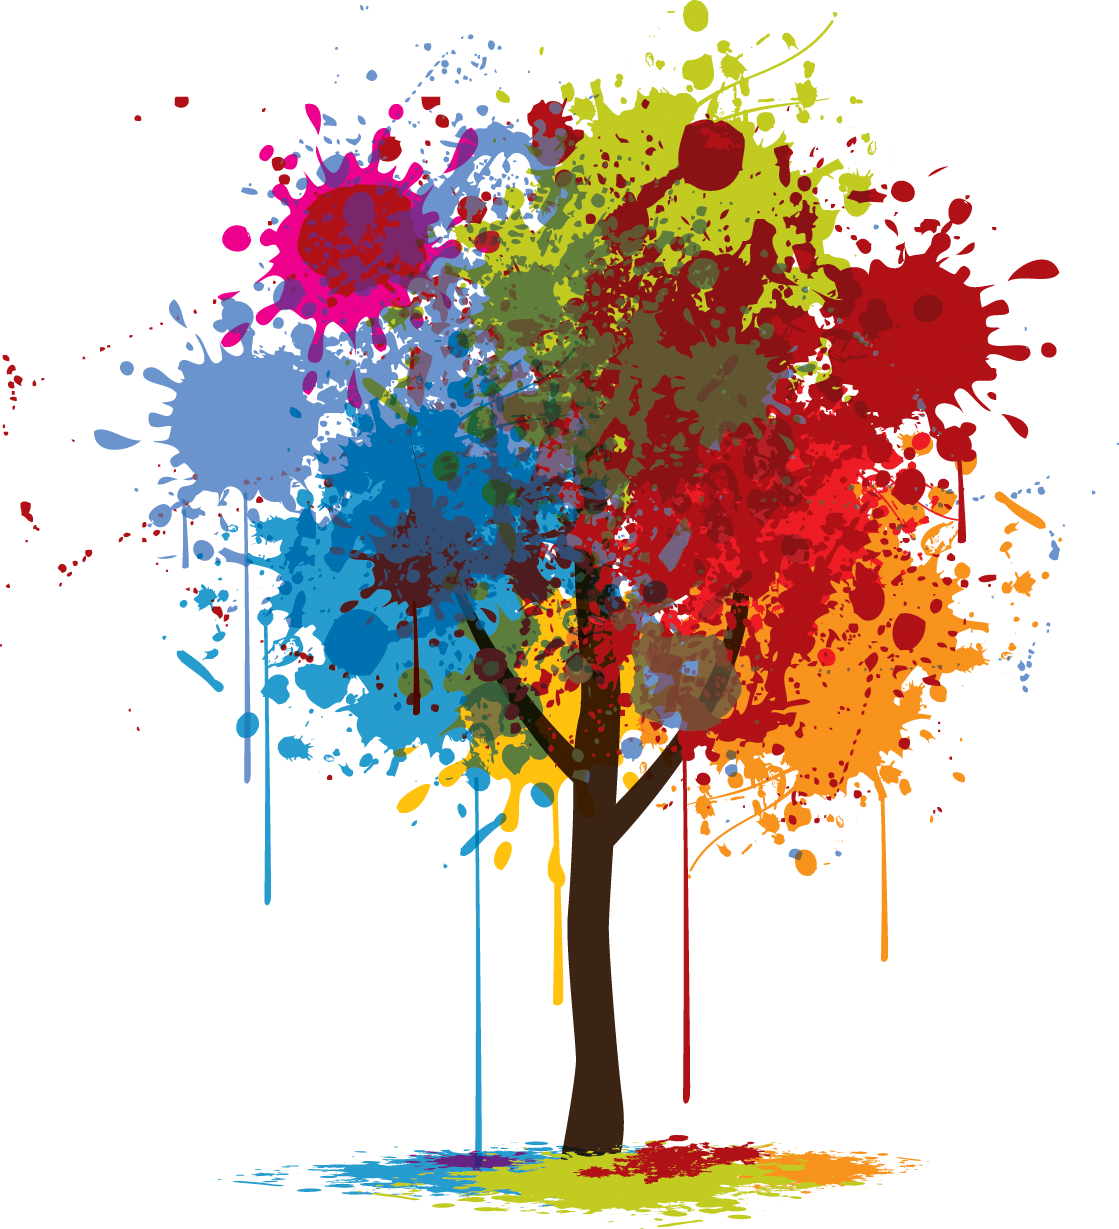 Tree with dripping splotches of color for leaves